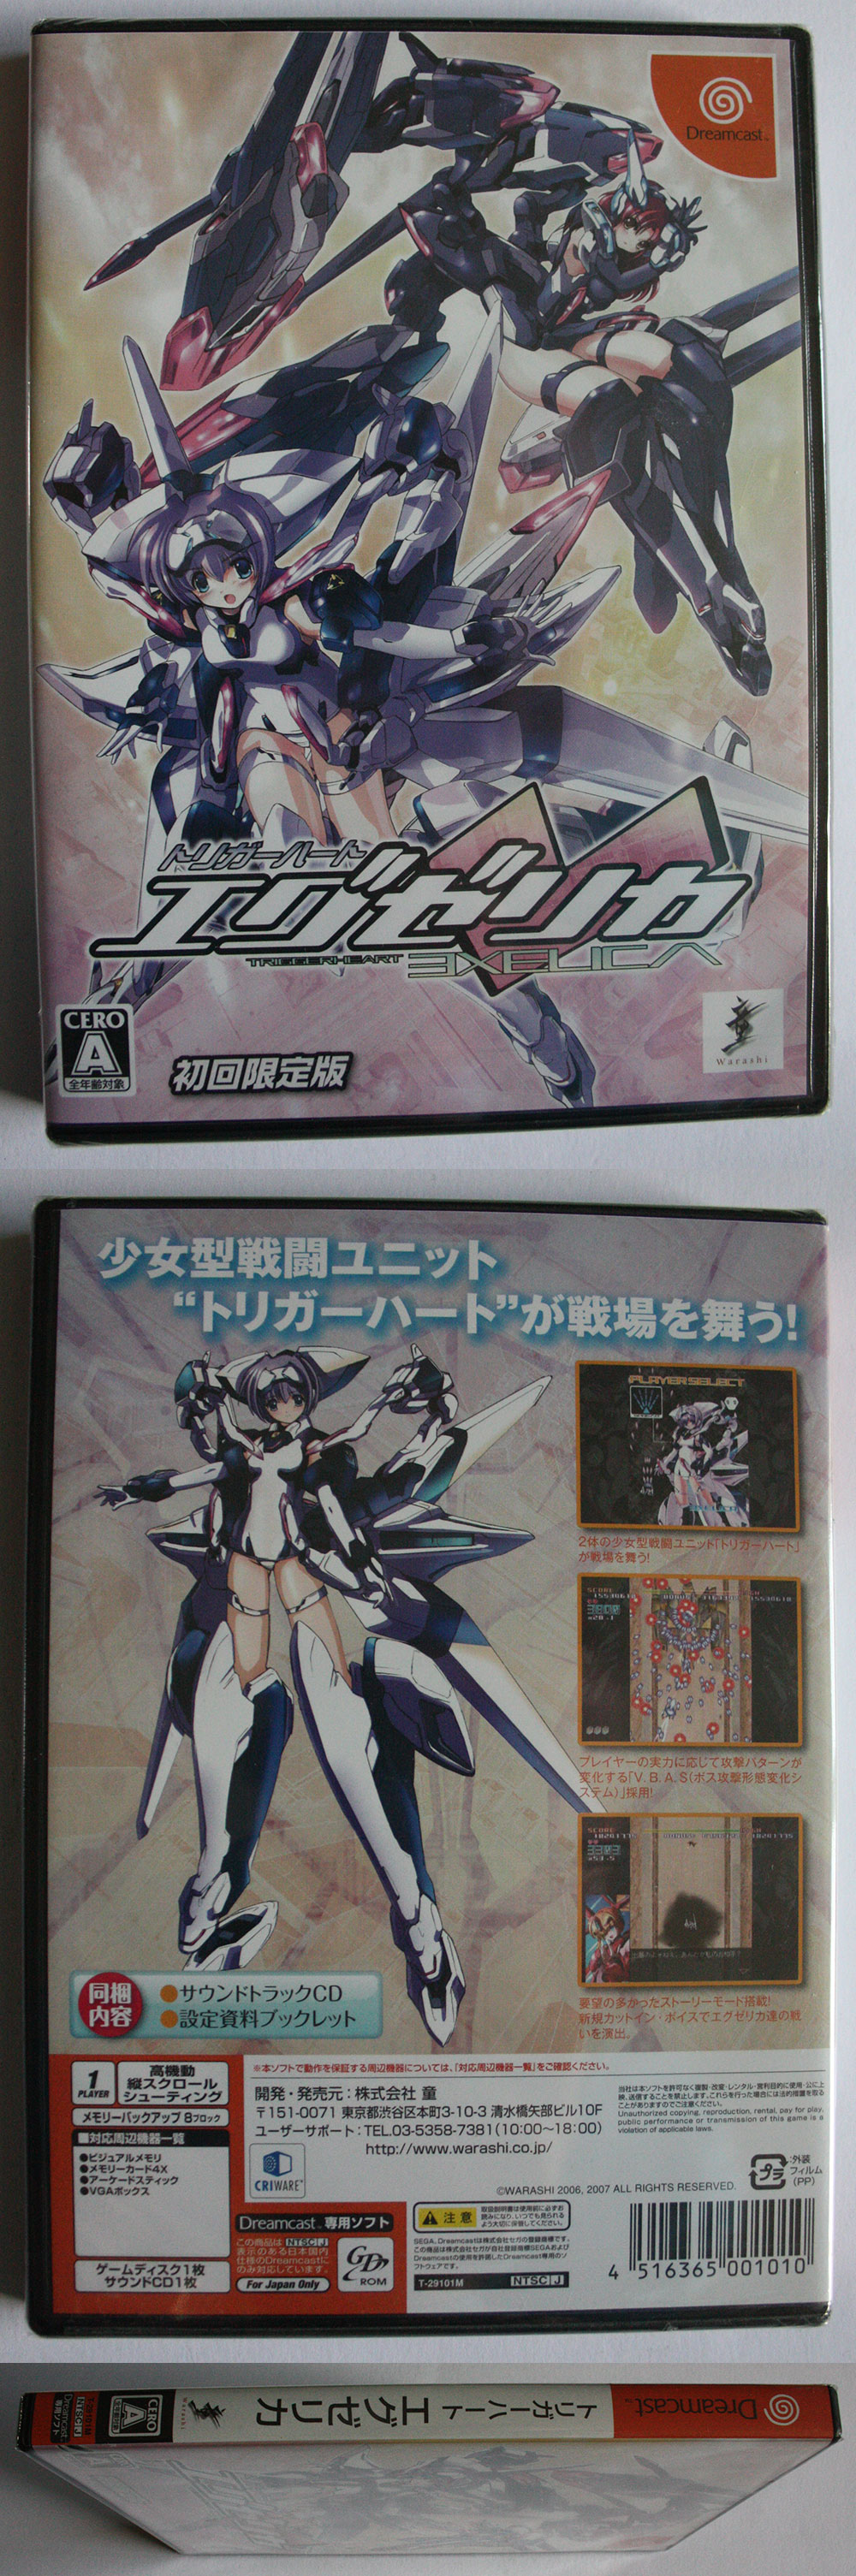 Trigger Heart Exelica Limited Edition (New) from Warashi - Dreamcast